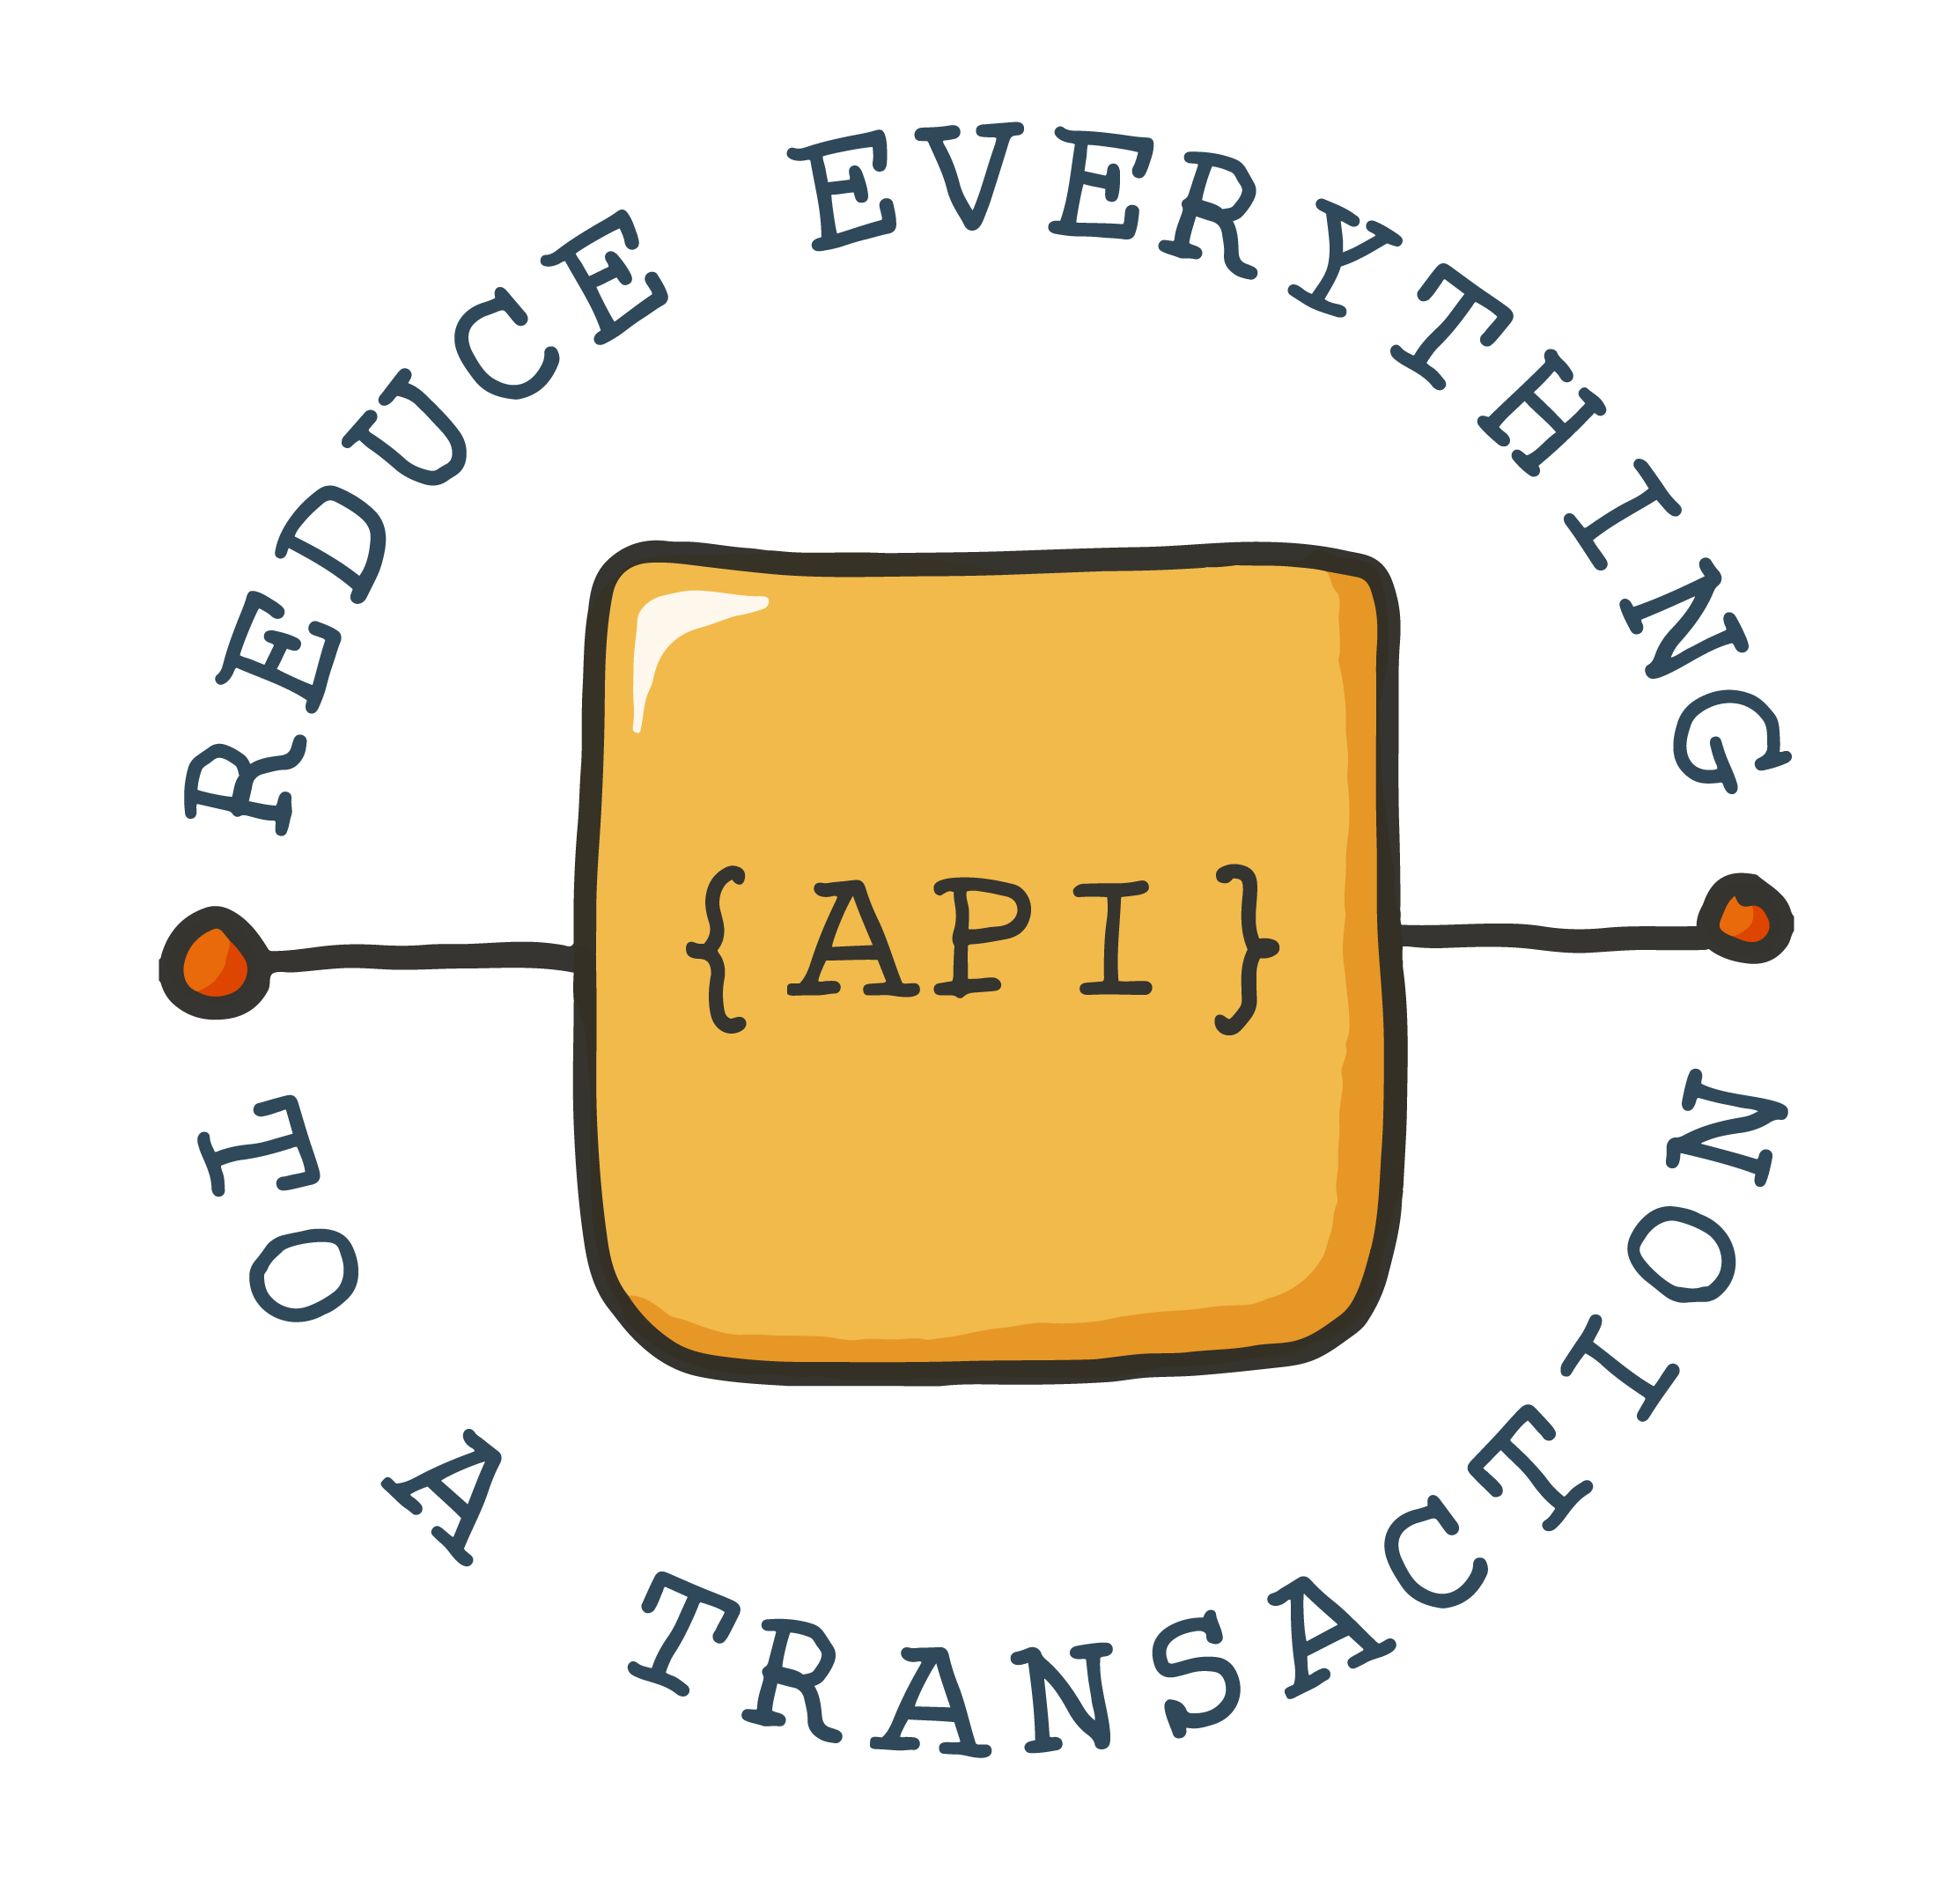 reduce everything to a transaction_tr